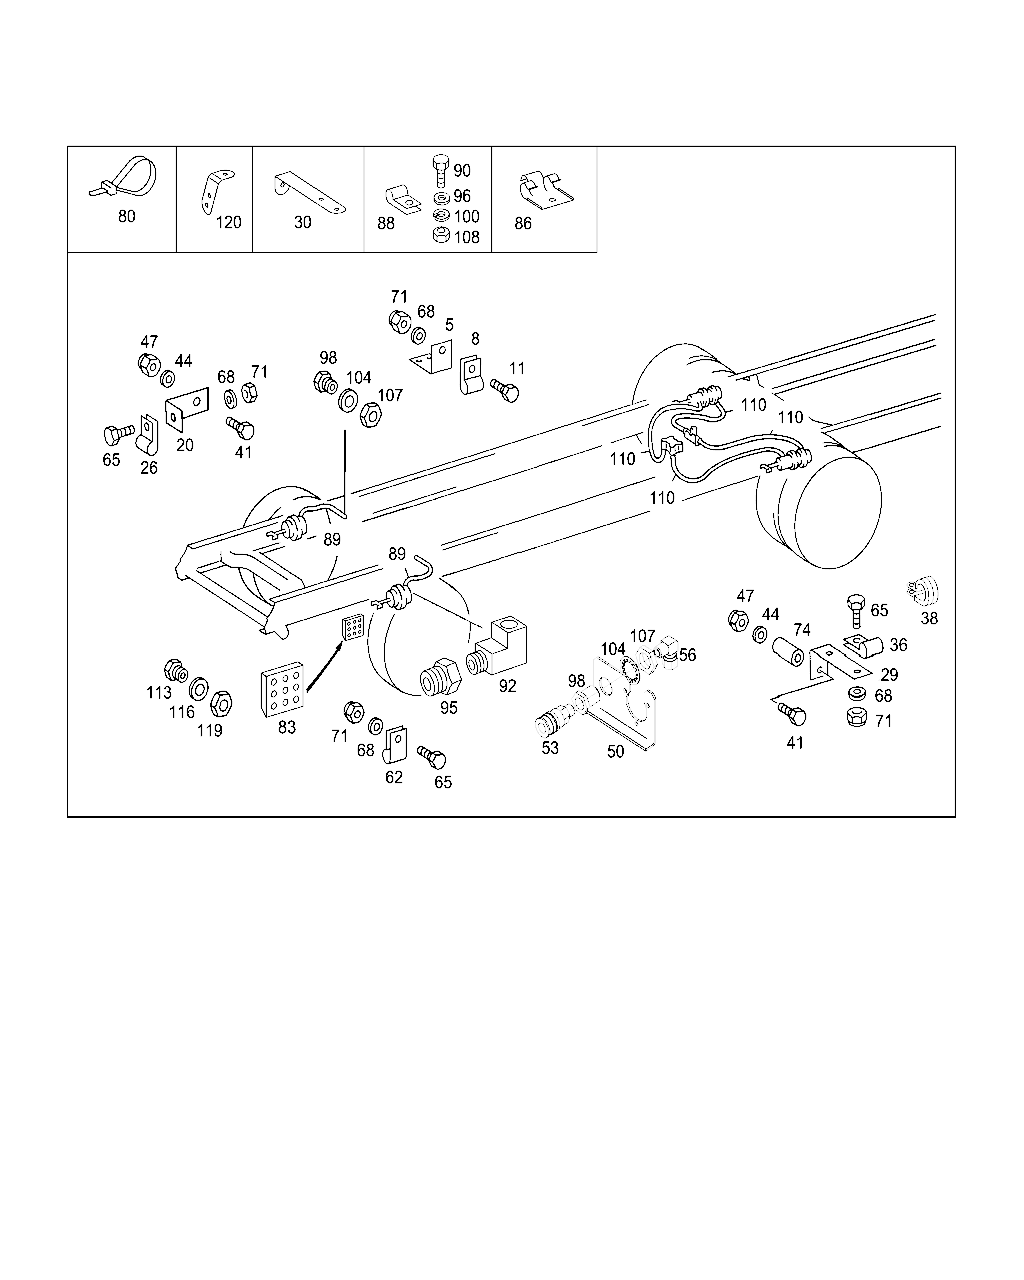 MOUNTING OF LINES,HOSES,TEST CONNECTIONS [客车] MERCEDES [欧洲] [機殼]OMC 1623 51 1626 51